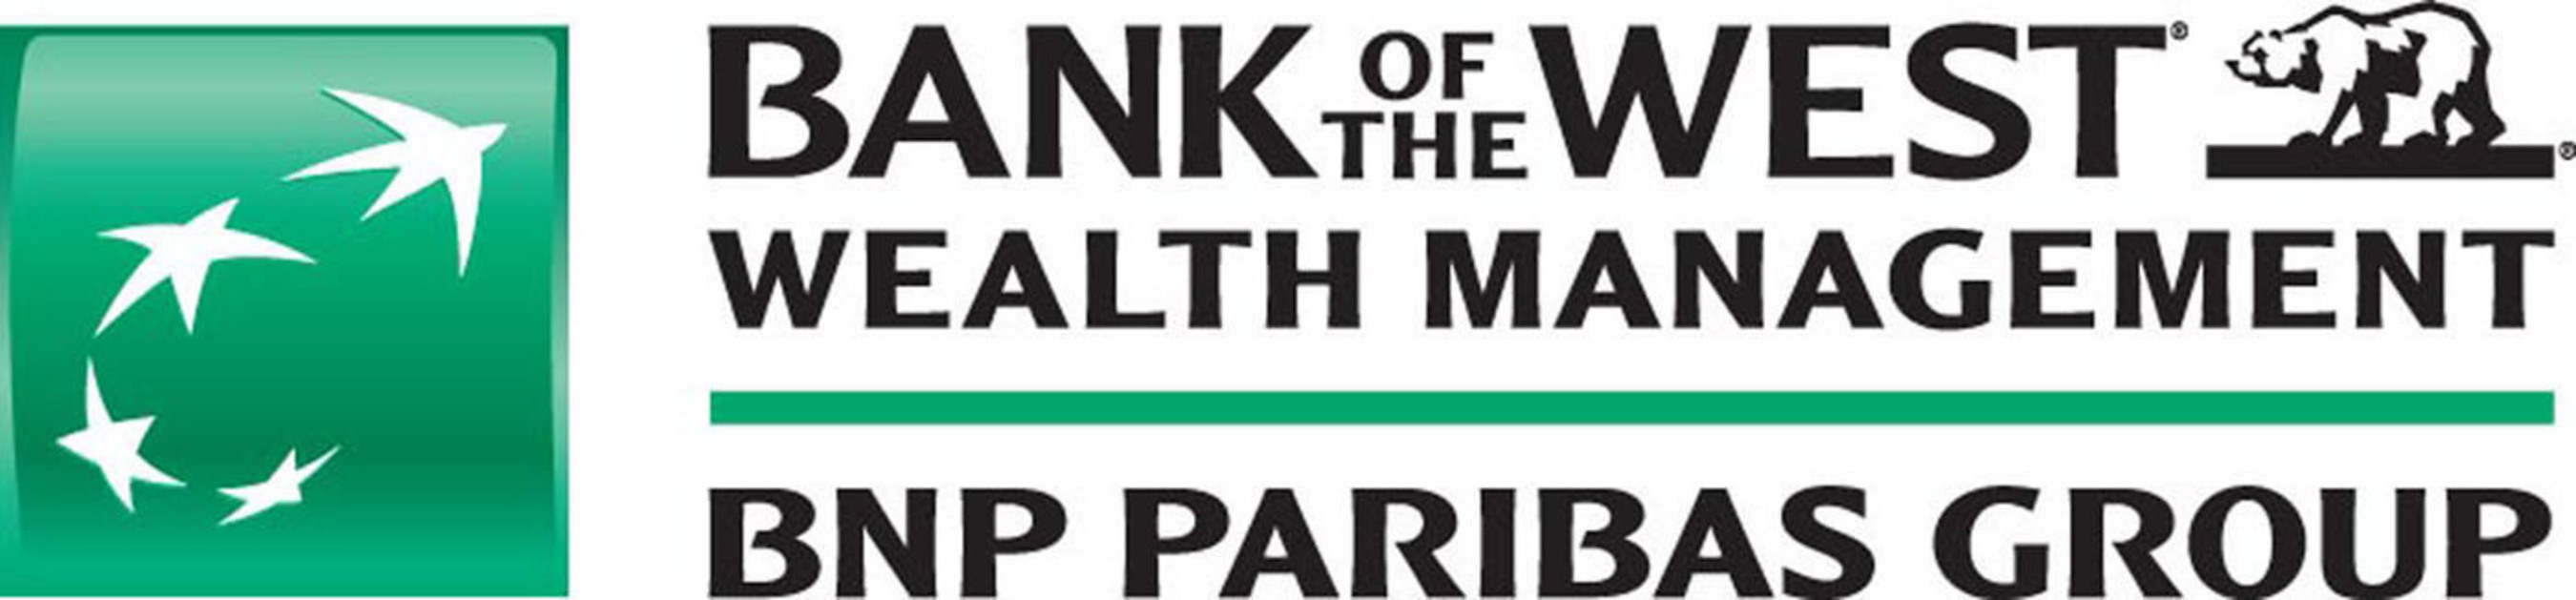 Bank of the West Wealth Management logo. (PRNewsFoto/Bank of the West) (PRNewsFoto/)